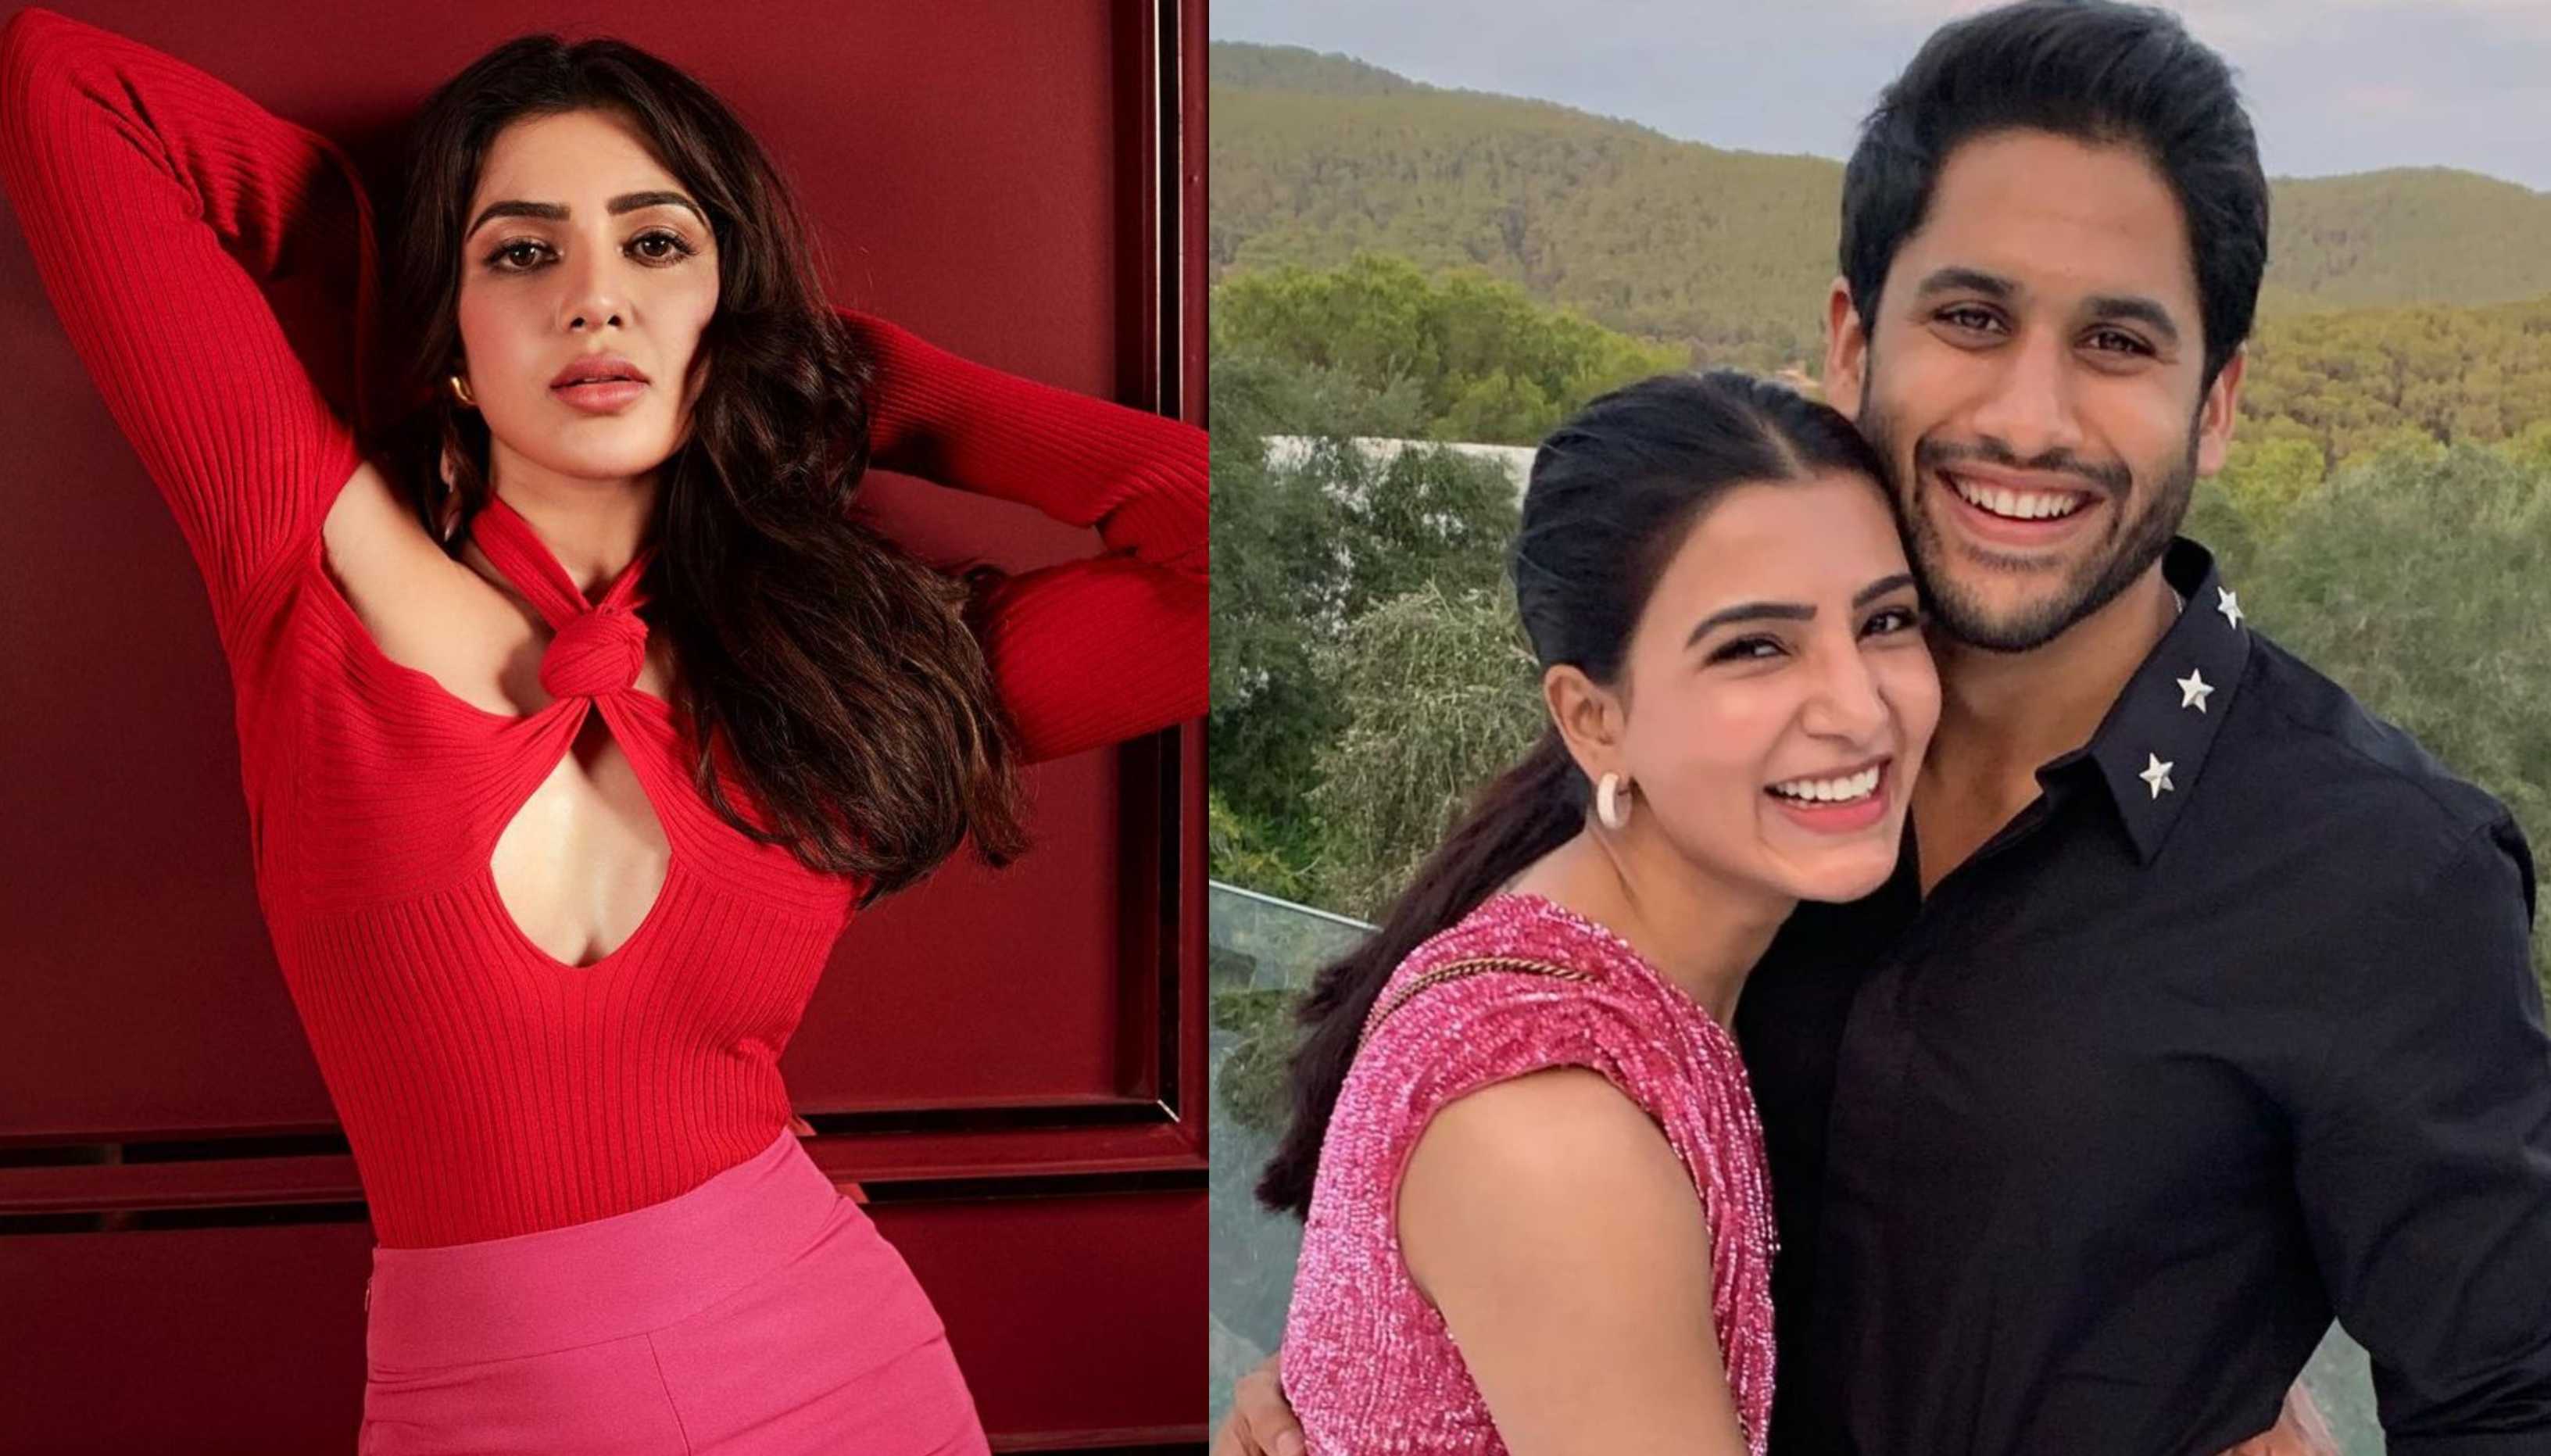 Samantha Ruth Prabhu gets candid about divorce with Naga Chaitanya on Koffee With Karan 7; reveals there are hard feelings